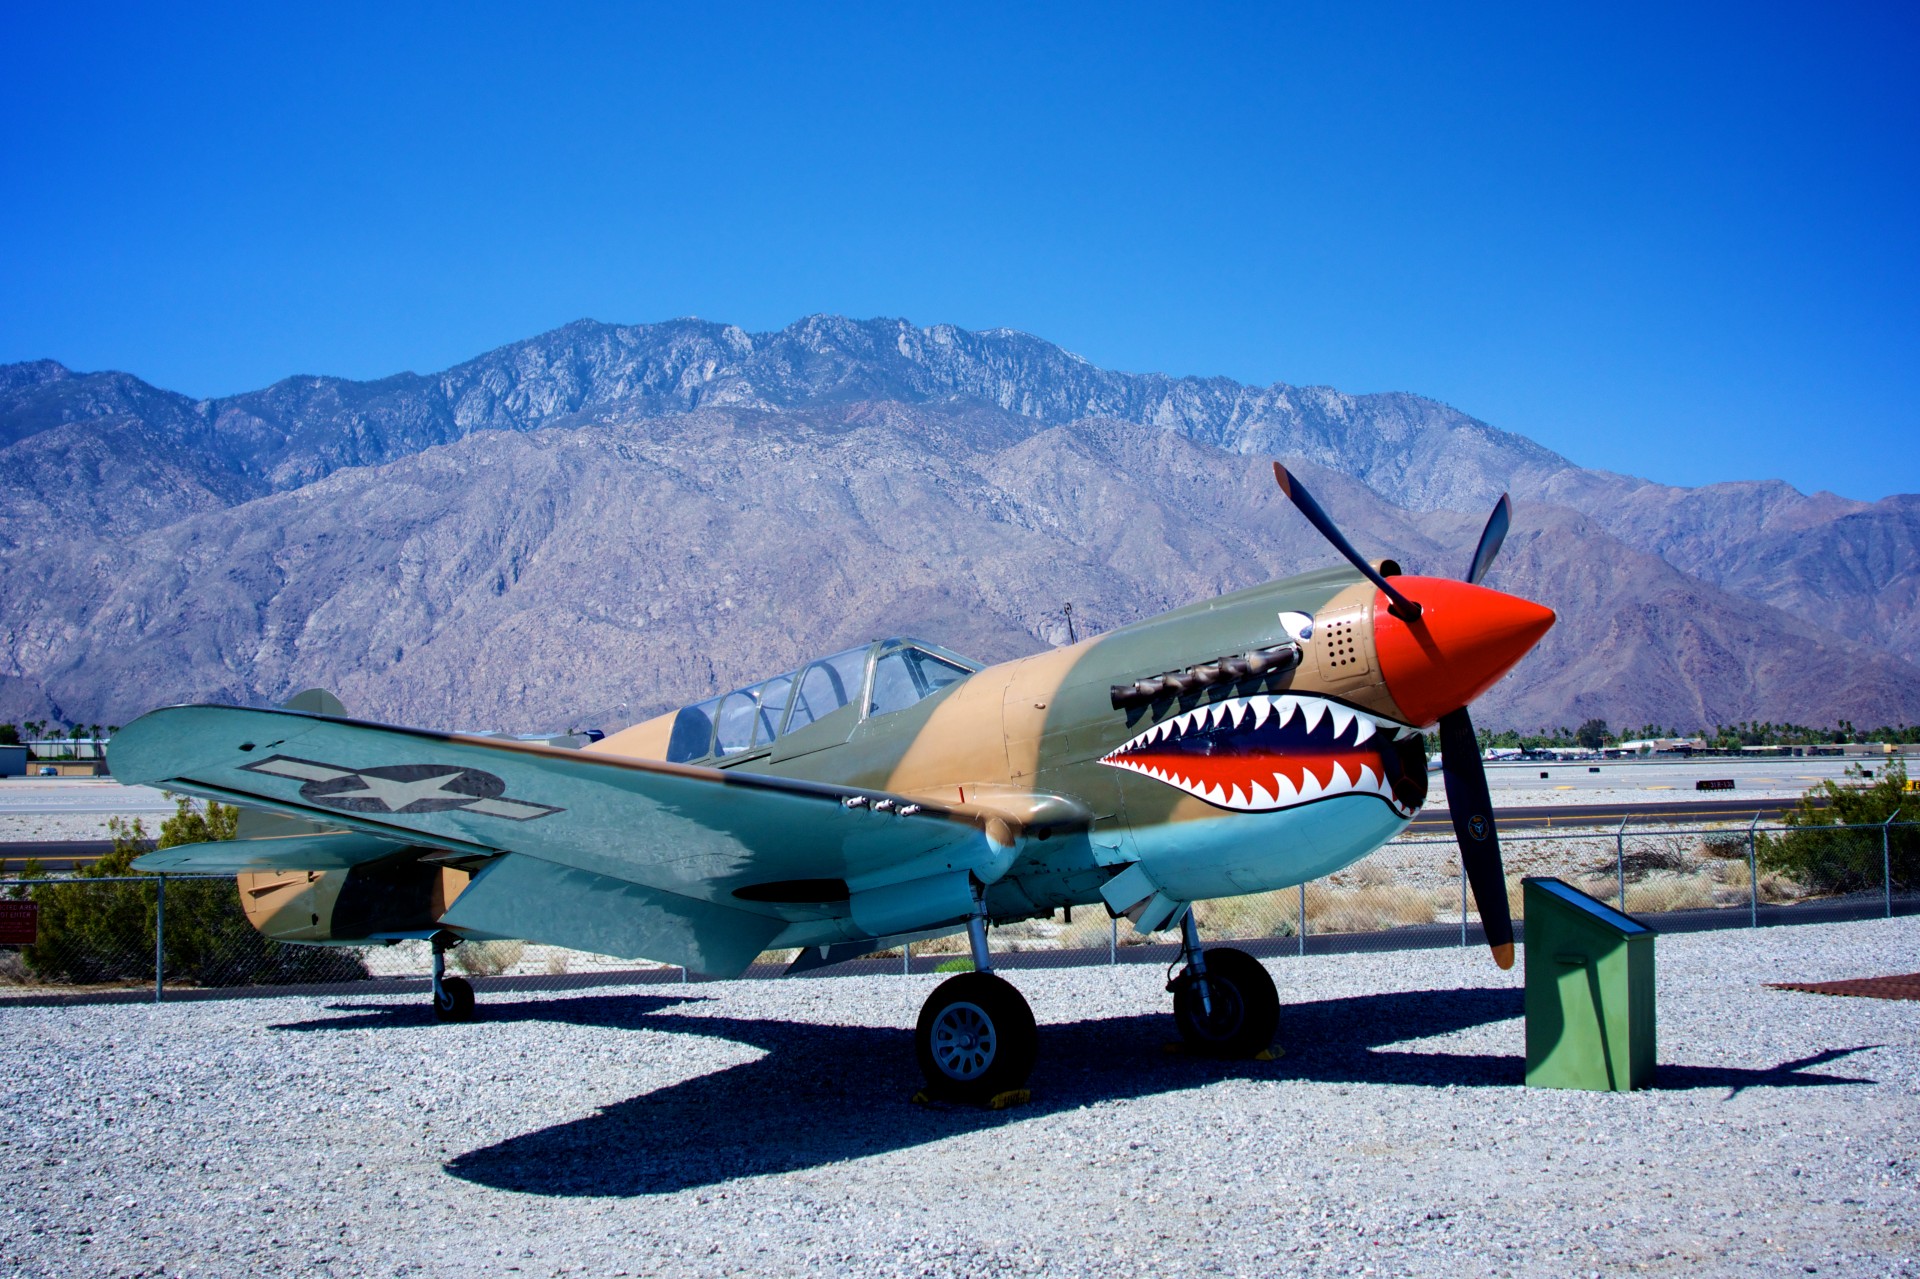 p-40-warhawk-fighter-free-stock-photo-public-domain-pictures